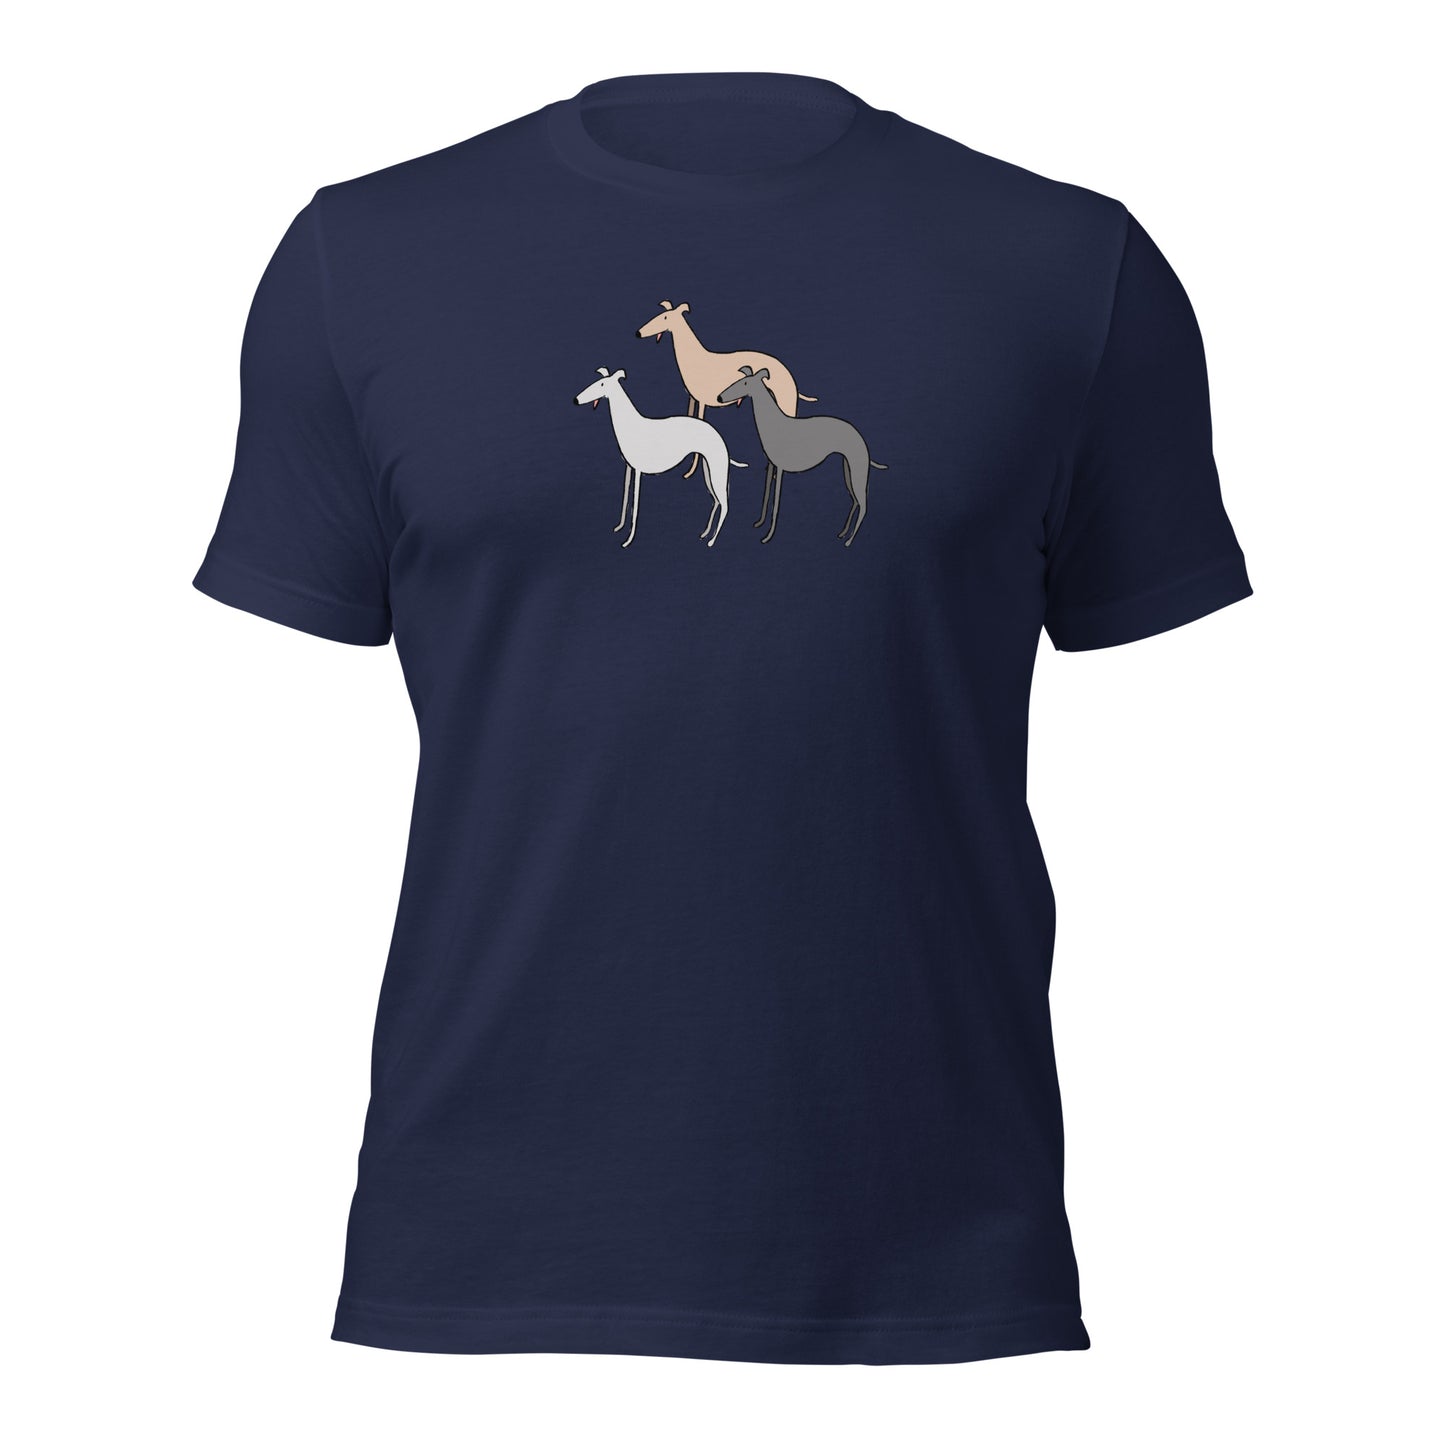 Bella + Canvas unisex t-shirt with Three Whippets design